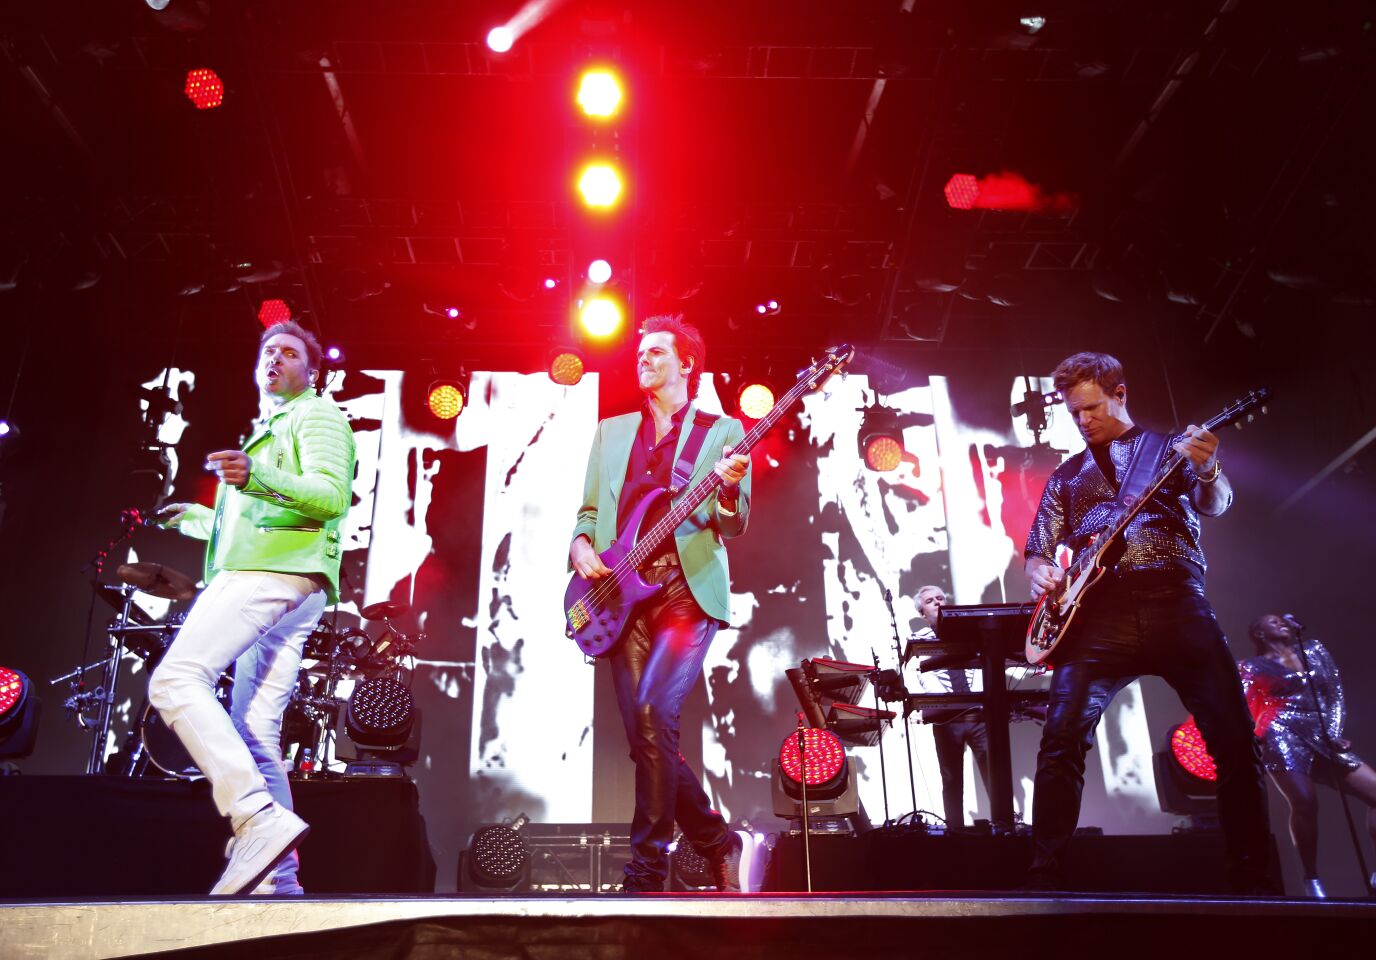 Singer Simon Le Bon, left, and bassist John Taylor and guitarist Dominic Brown of the band Duran Duran perform at KAABOO Del Mar on Sept. 15, 2019.